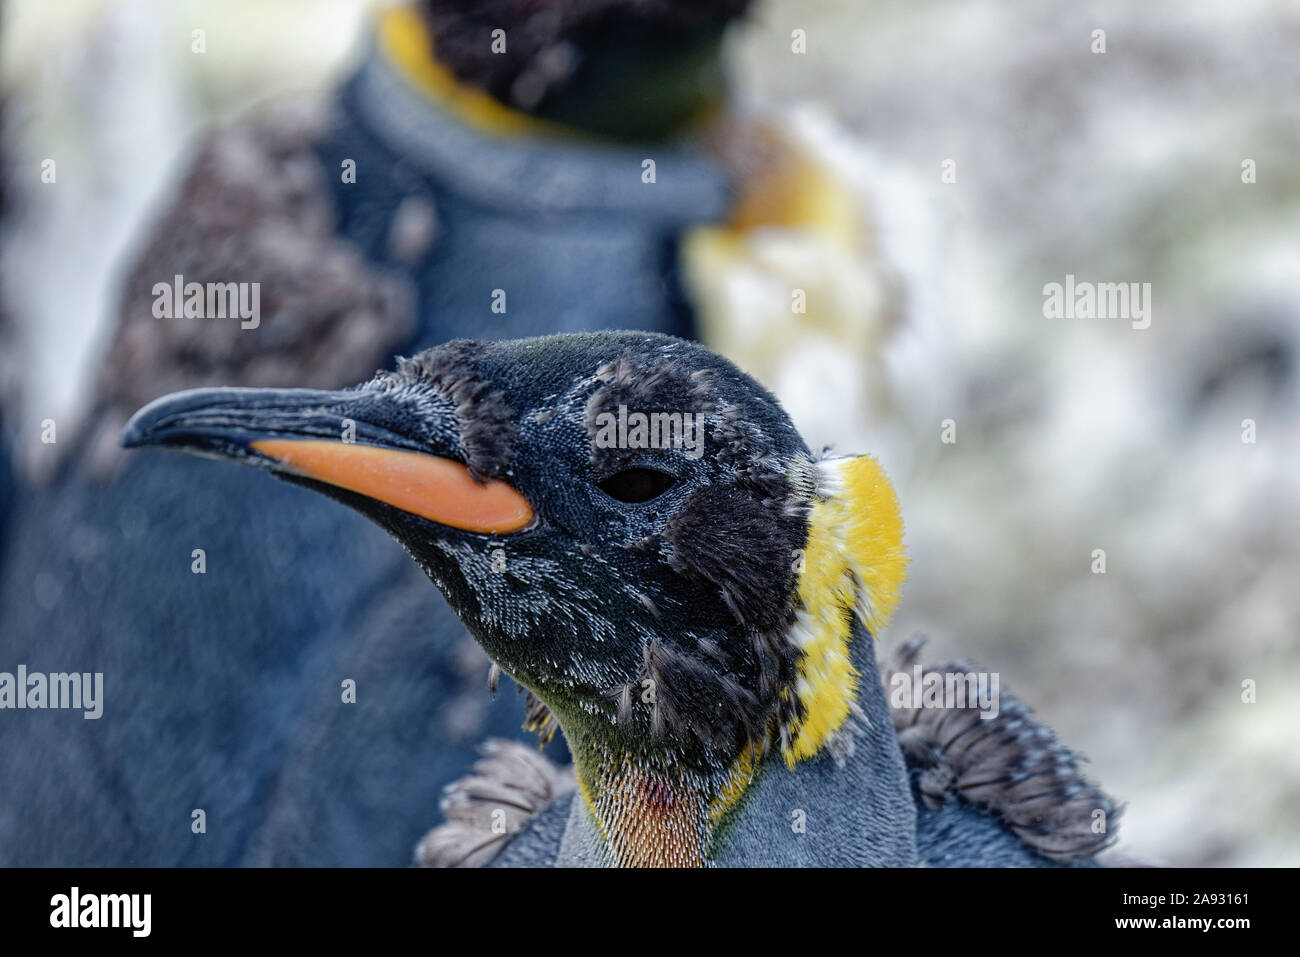 King penguin (Aptenodytes patagonicus), close up portrait, in moult, St. Andrews Bay, South Georgia Stock Photo